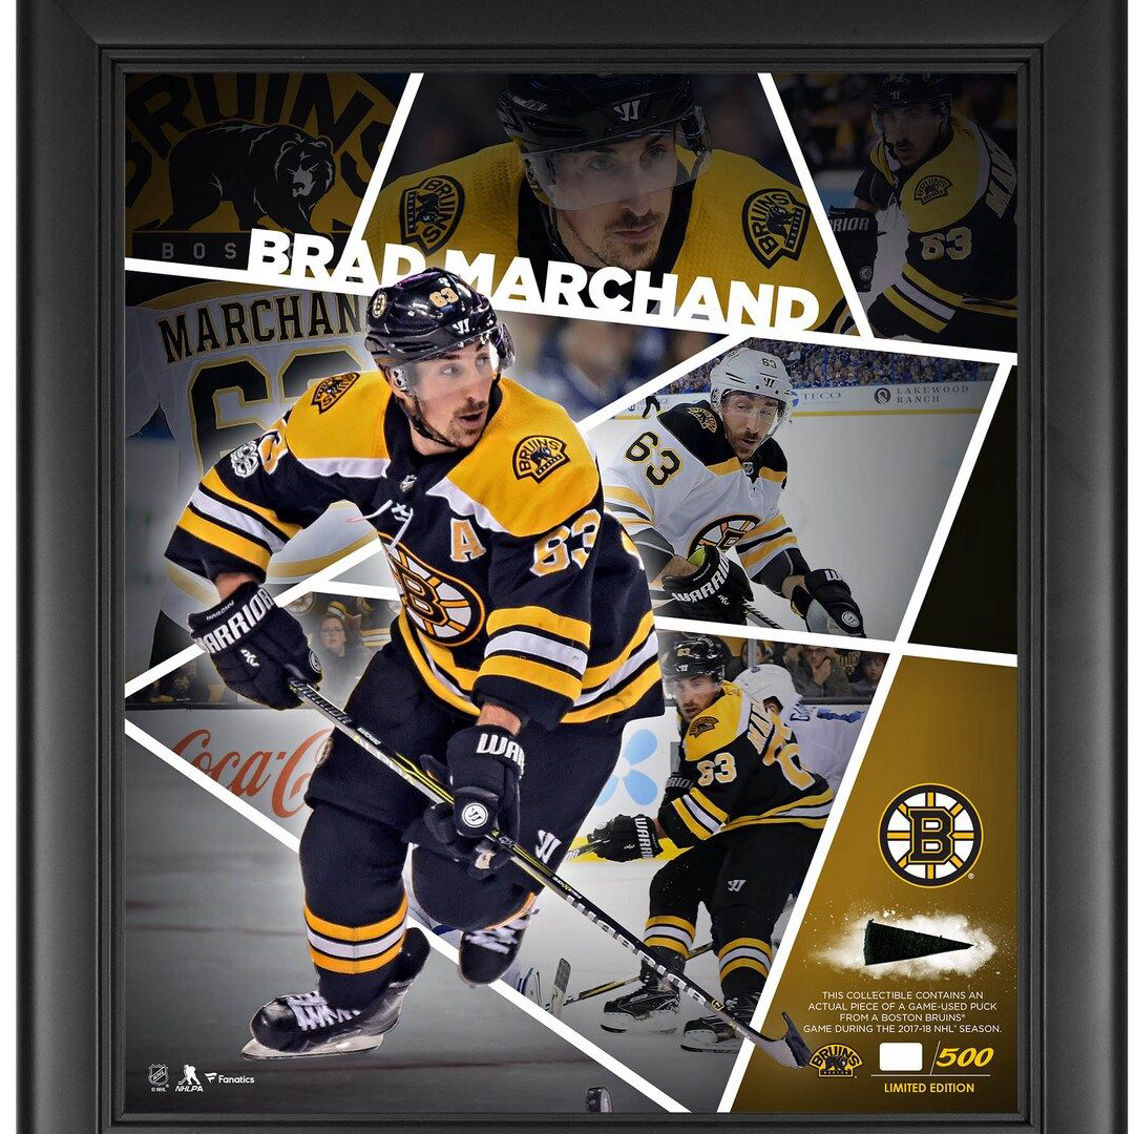 Fanatics Authentic Brad Marchand Boston Bruins Framed 15'' x 17'' Impact Player Collage with a Piece of Game-Used Puck - Limited Edition of 500 - Image 2 of 2